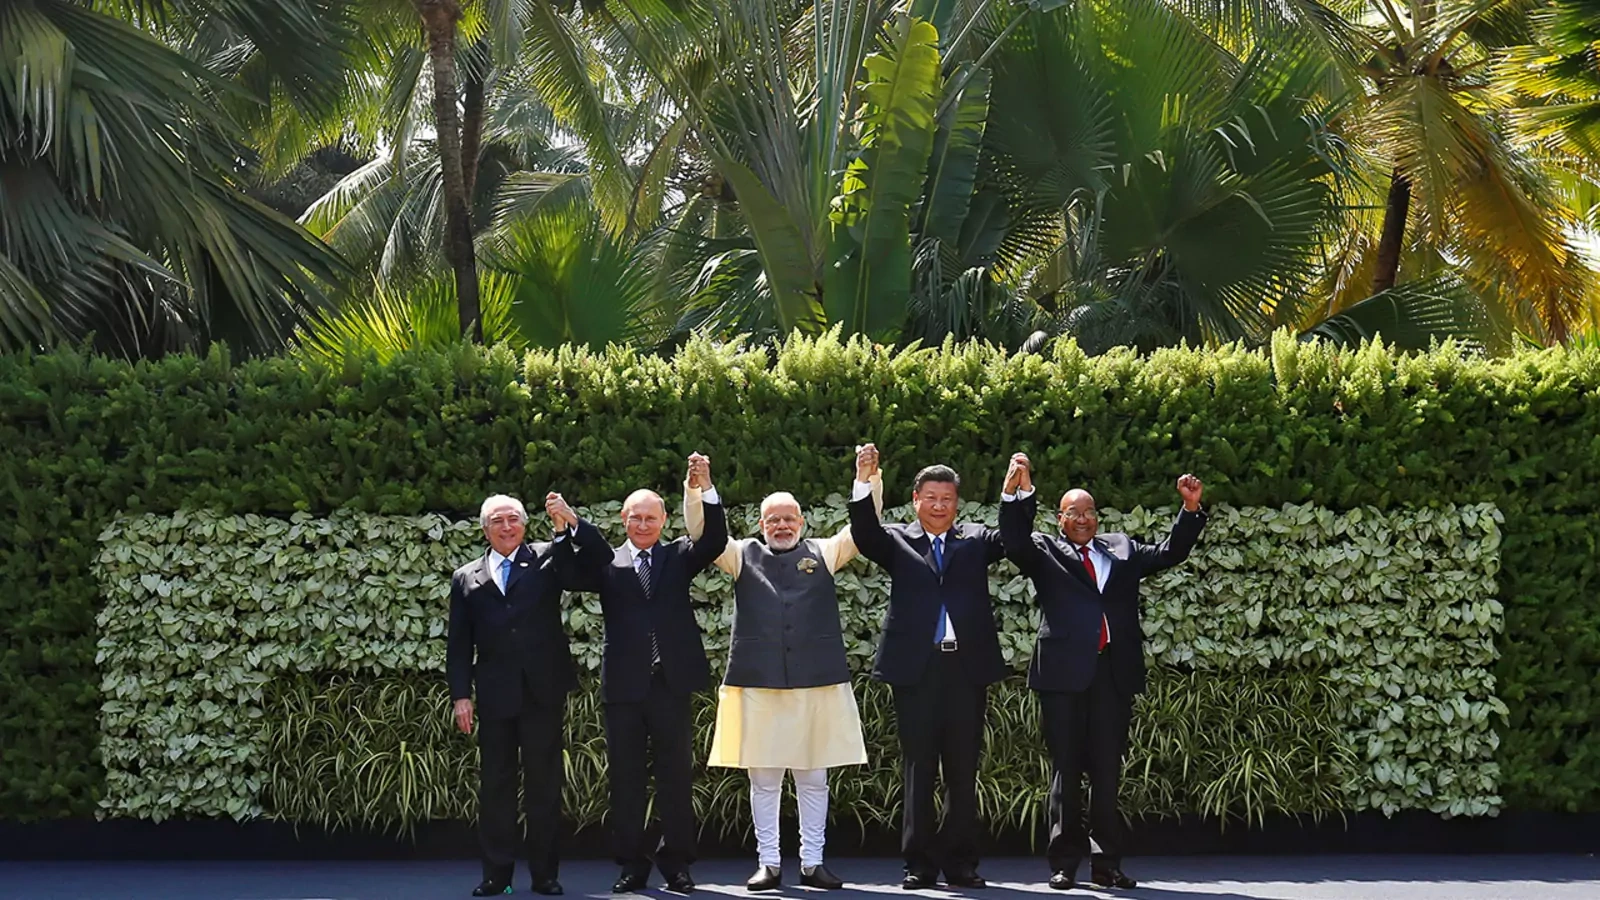 Leaders of the BRICS pose for a group photo during an October 2016 summit in India.